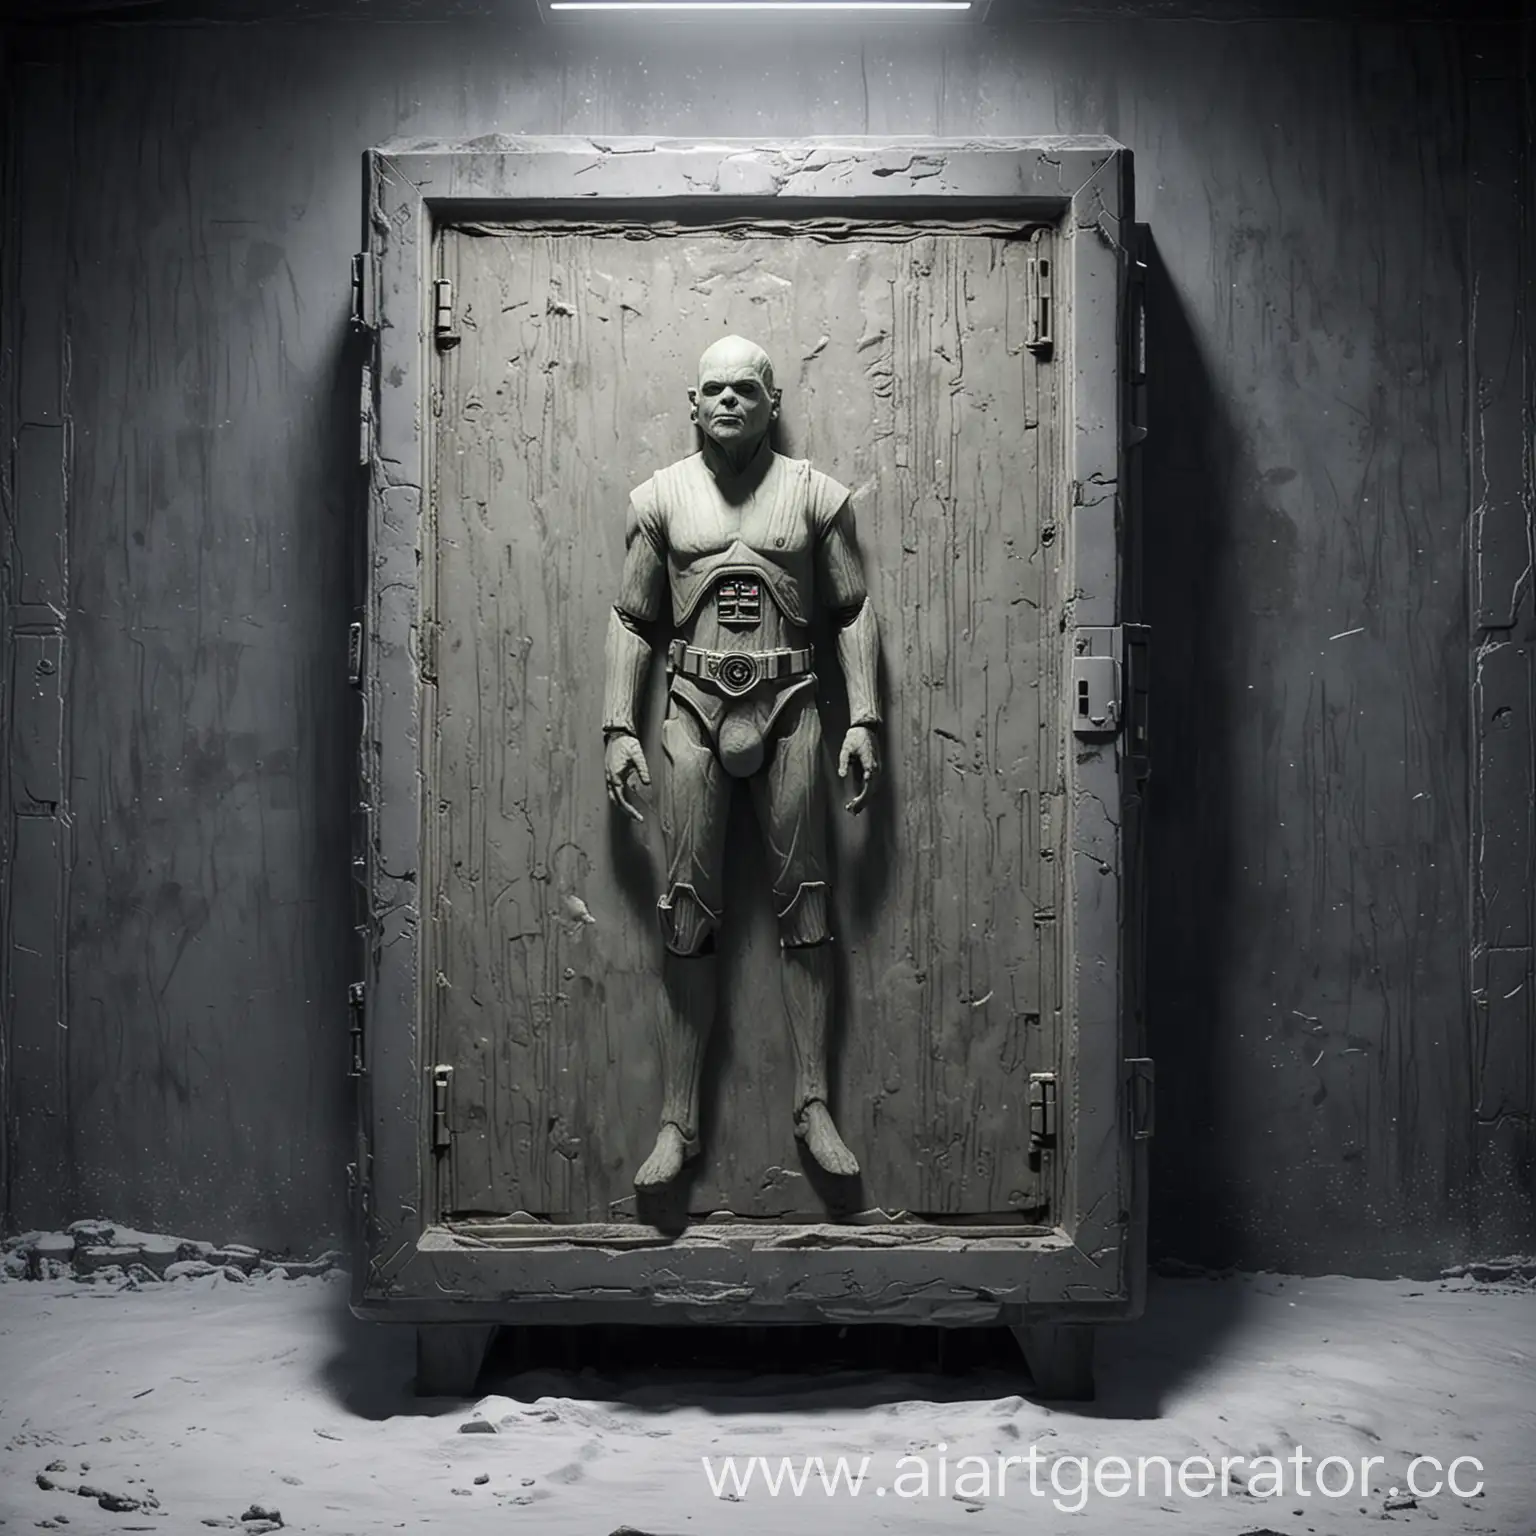 Carbonite-Freezer-in-Star-Wars-Universe-SciFi-Technology-Depicted-in-Frozen-Captivity